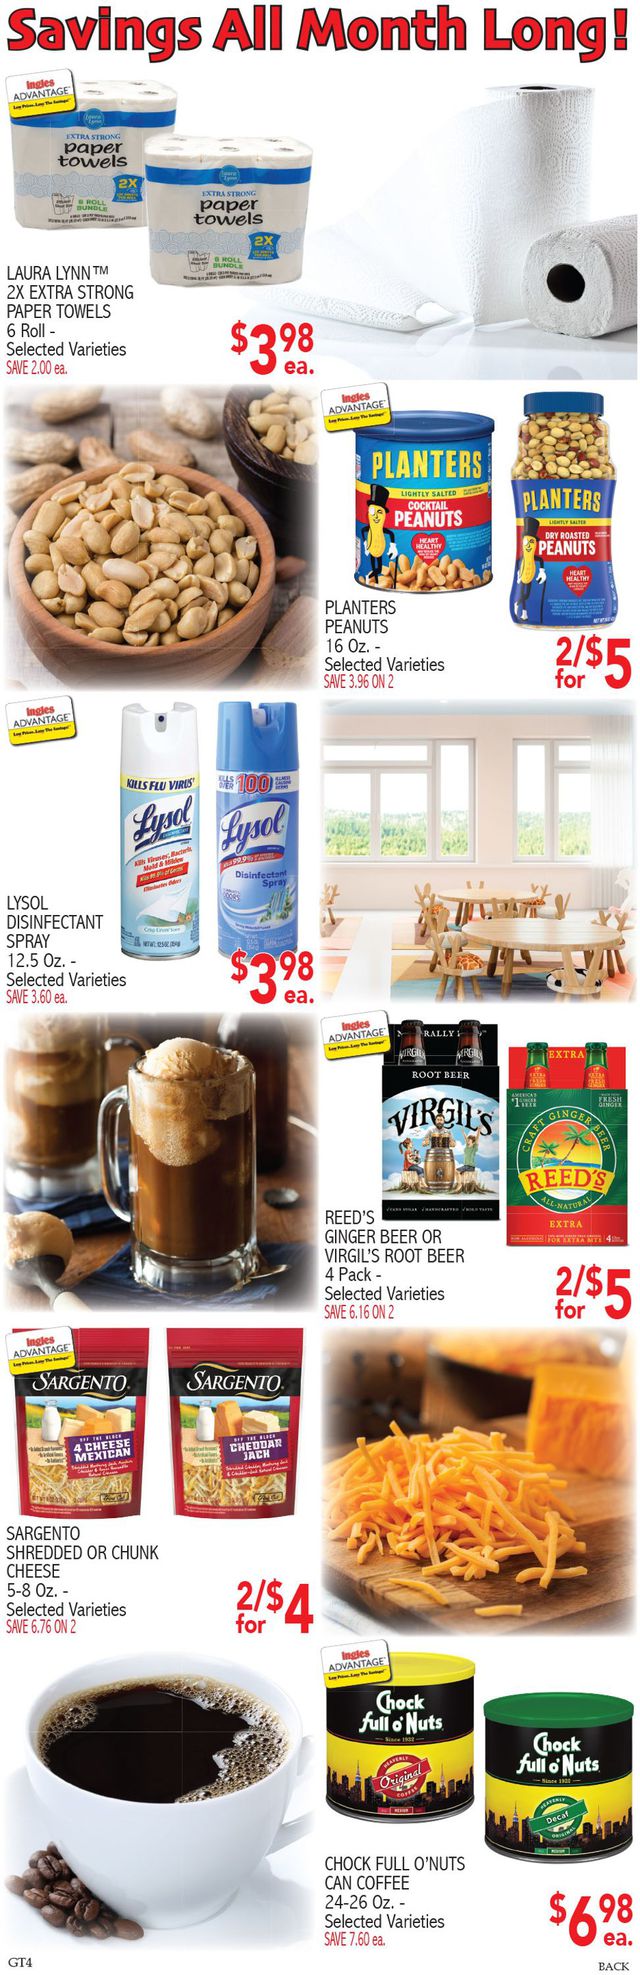 Ingles Ad from 06/15/2022